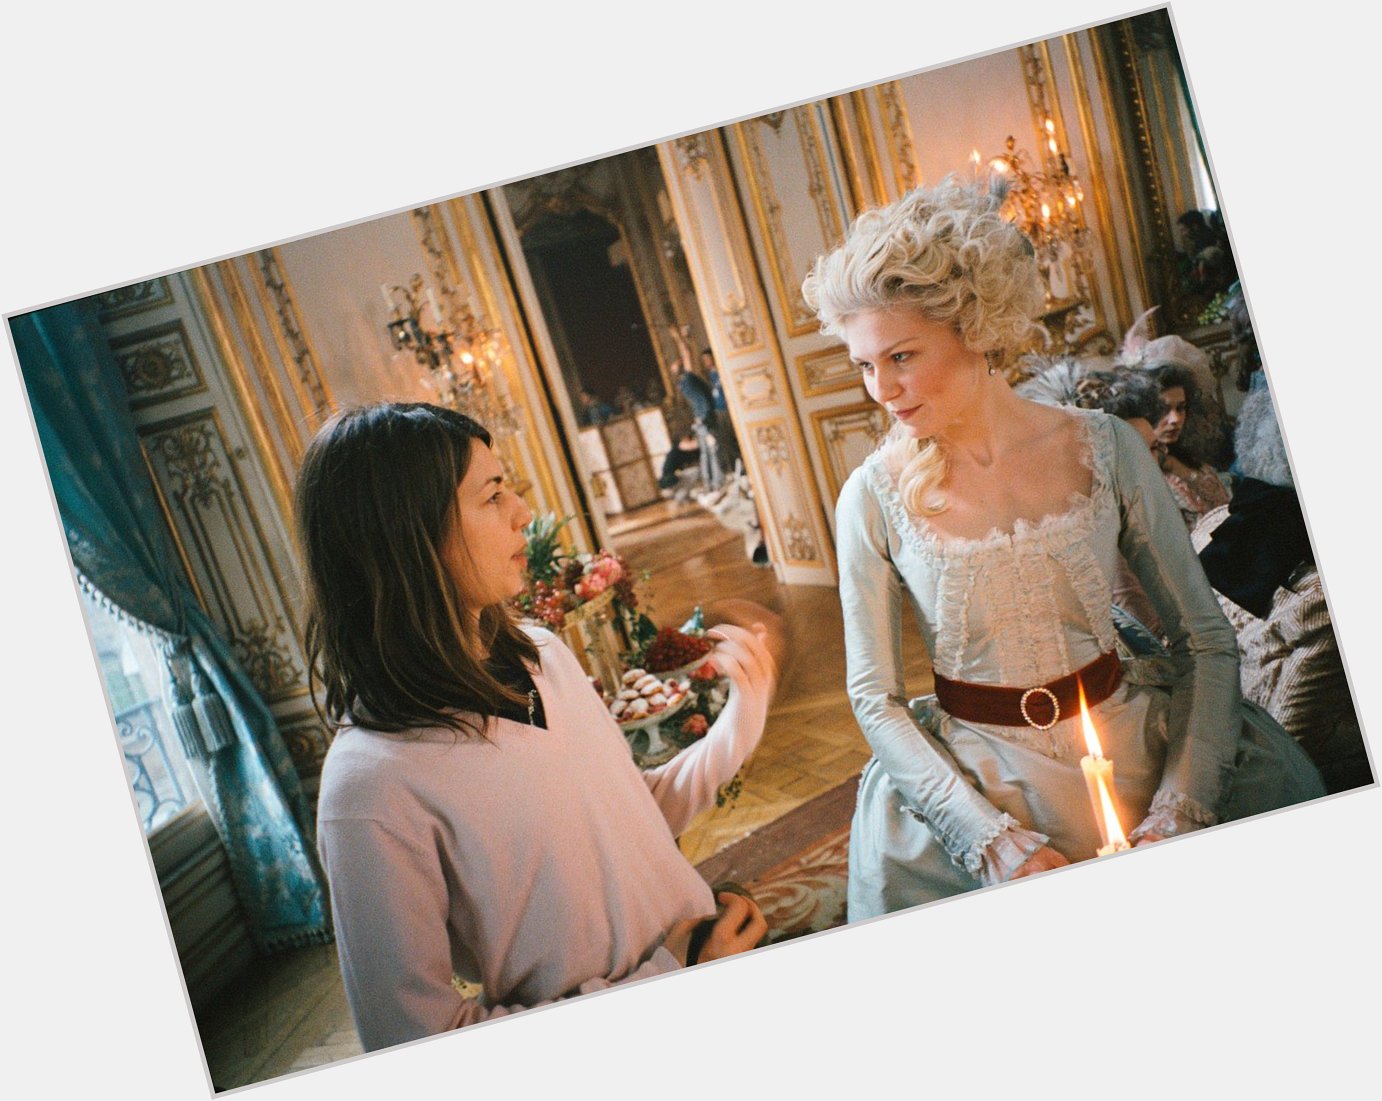 Happy Birthday Sofia Coppola! Here she is directing on the set of my favourite of her films, Marie Antoinette   